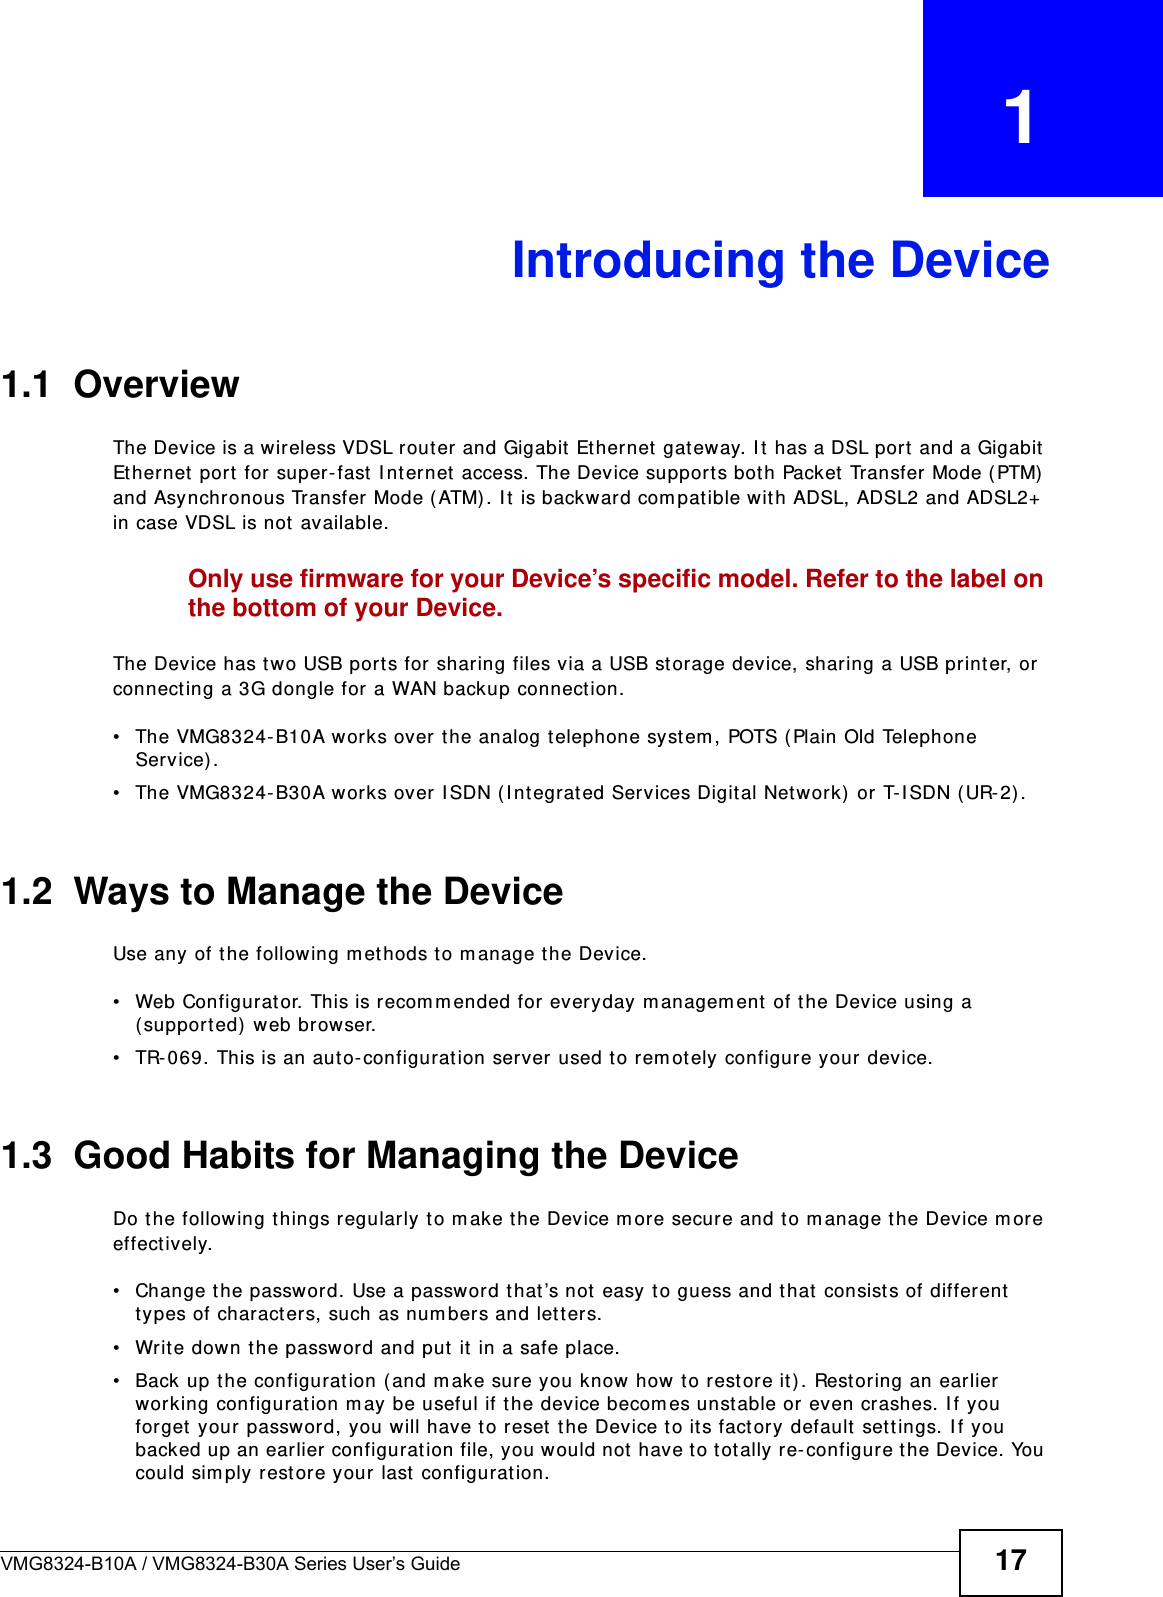 VMG8324-B10A / VMG8324-B30A Series User’s Guide 17CHAPTER   1Introducing the Device1.1  OverviewThe Device is a wir eless VDSL router and Gigabit  Ethernet gat eway. I t  has a DSL port and a Gigabit Et hernet port  for super- fast  I nternet  access. The Device support s both Packet  Transfer Mode ( PTM)  and Asy nchr onous Transfer Mode ( ATM) . I t  is backward com patible w ith ADSL, ADSL2 and ADSL2+  in case VDSL is not  available.Only use firmware for your Device’s specific model. Refer to the label on the bottom of your Device.The Device has two USB por t s for sharing files via a USB st orage device, sharing a USB print er, or connect ing a 3G dongle for a WAN backup connect ion. • The VMG8324- B10A works over t he analog telephone syst em , POTS (Plain Old Telephone Service) . • The VMG8324- B30A works over I SDN ( I nt egrated Services Digital Net work)  or T- I SDN ( UR- 2) .1.2  Ways to Manage the DeviceUse any of the following m et hods t o m anage t he Device.• Web Configurat or. This is recom m ended for everyday m anagem ent  of t he Device using a ( suppor t ed)  web browser.• TR-069. This is an aut o-configuration server used t o rem ot ely configure your device.1.3  Good Habits for Managing the DeviceDo the following t hings regular ly to m ake the Device m ore secure and to m anage t he Device m ore effect ively.• Change the password. Use a password t hat’s not easy t o guess and that consist s of different  types of charact er s, such as num bers and let t ers.• Writ e down t he passw ord and put  it in a safe place.• Back up t he configuration ( and m ake sure you know how t o rest ore it ) . Rest oring an earlier working configurat ion m ay be useful if t he device becom es unstable or even crashes. I f you forget  your password, you will have t o reset  t he Device t o it s factory default set t ings. I f you backed up an earlier configurat ion file, you would not have t o t ot ally re- configure t he Device. You could sim ply rest ore your last  configurat ion.